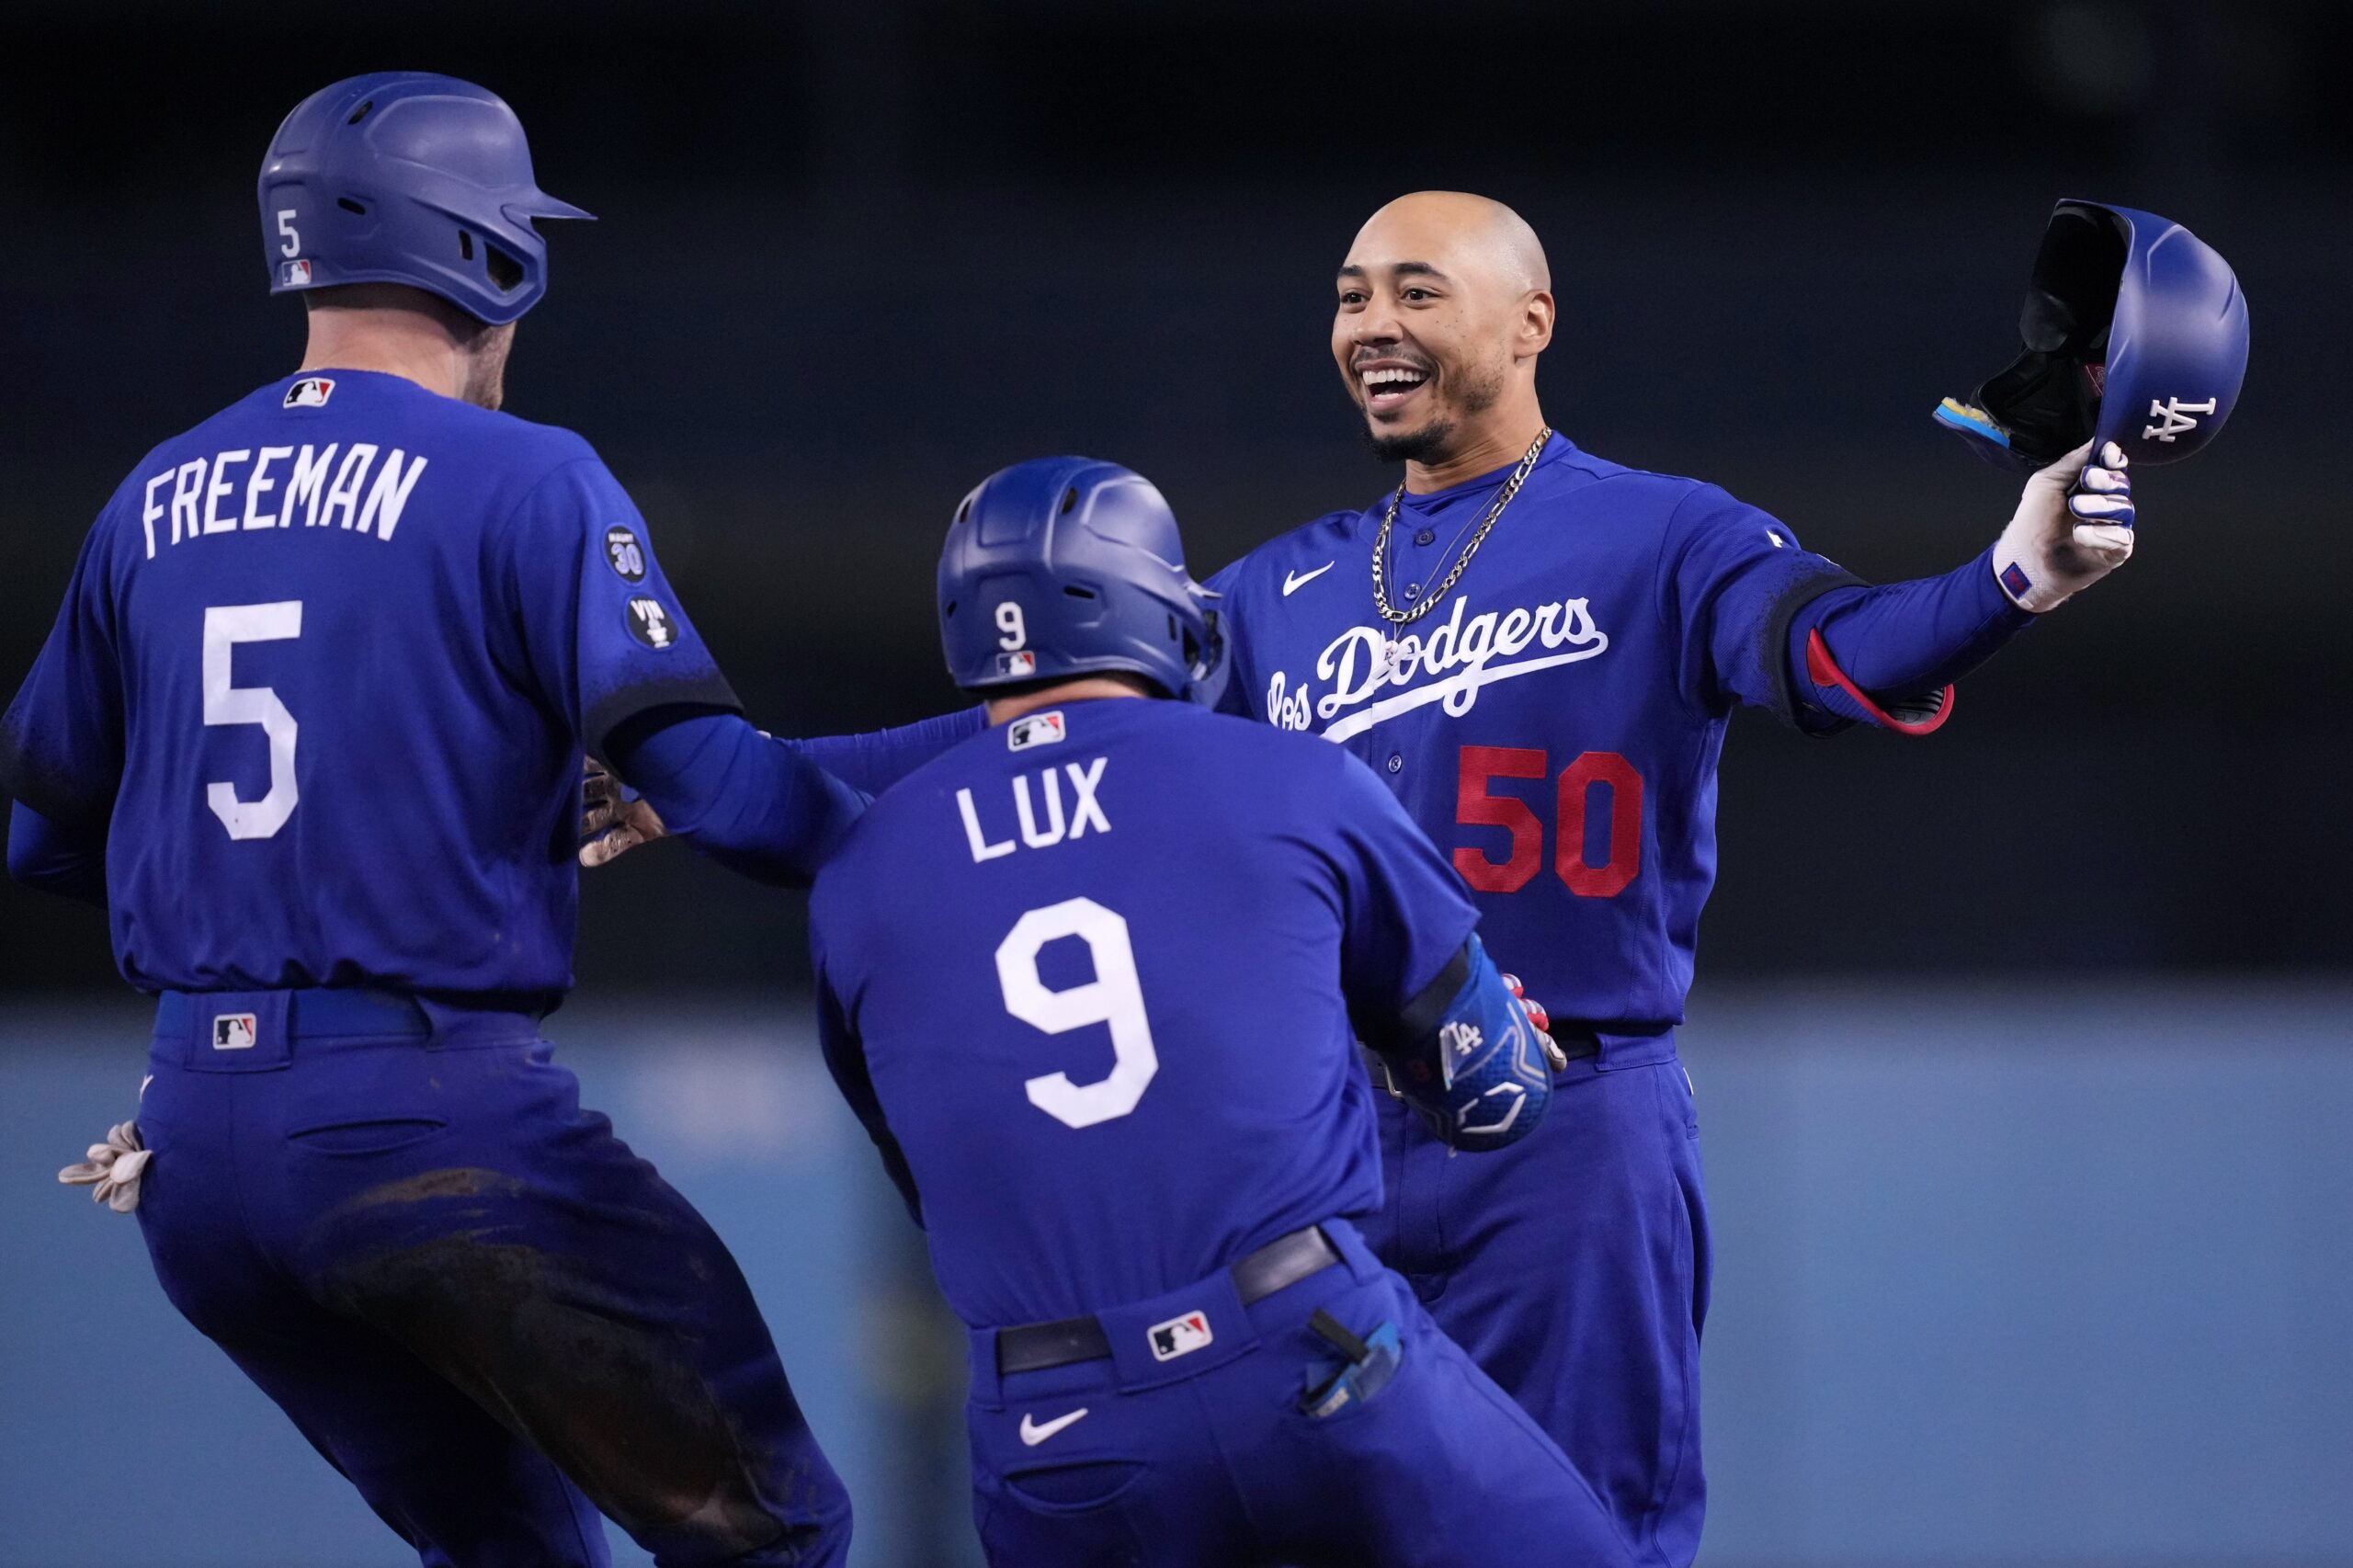 Dodgers' Mookie Betts issues World Series challenge to new team